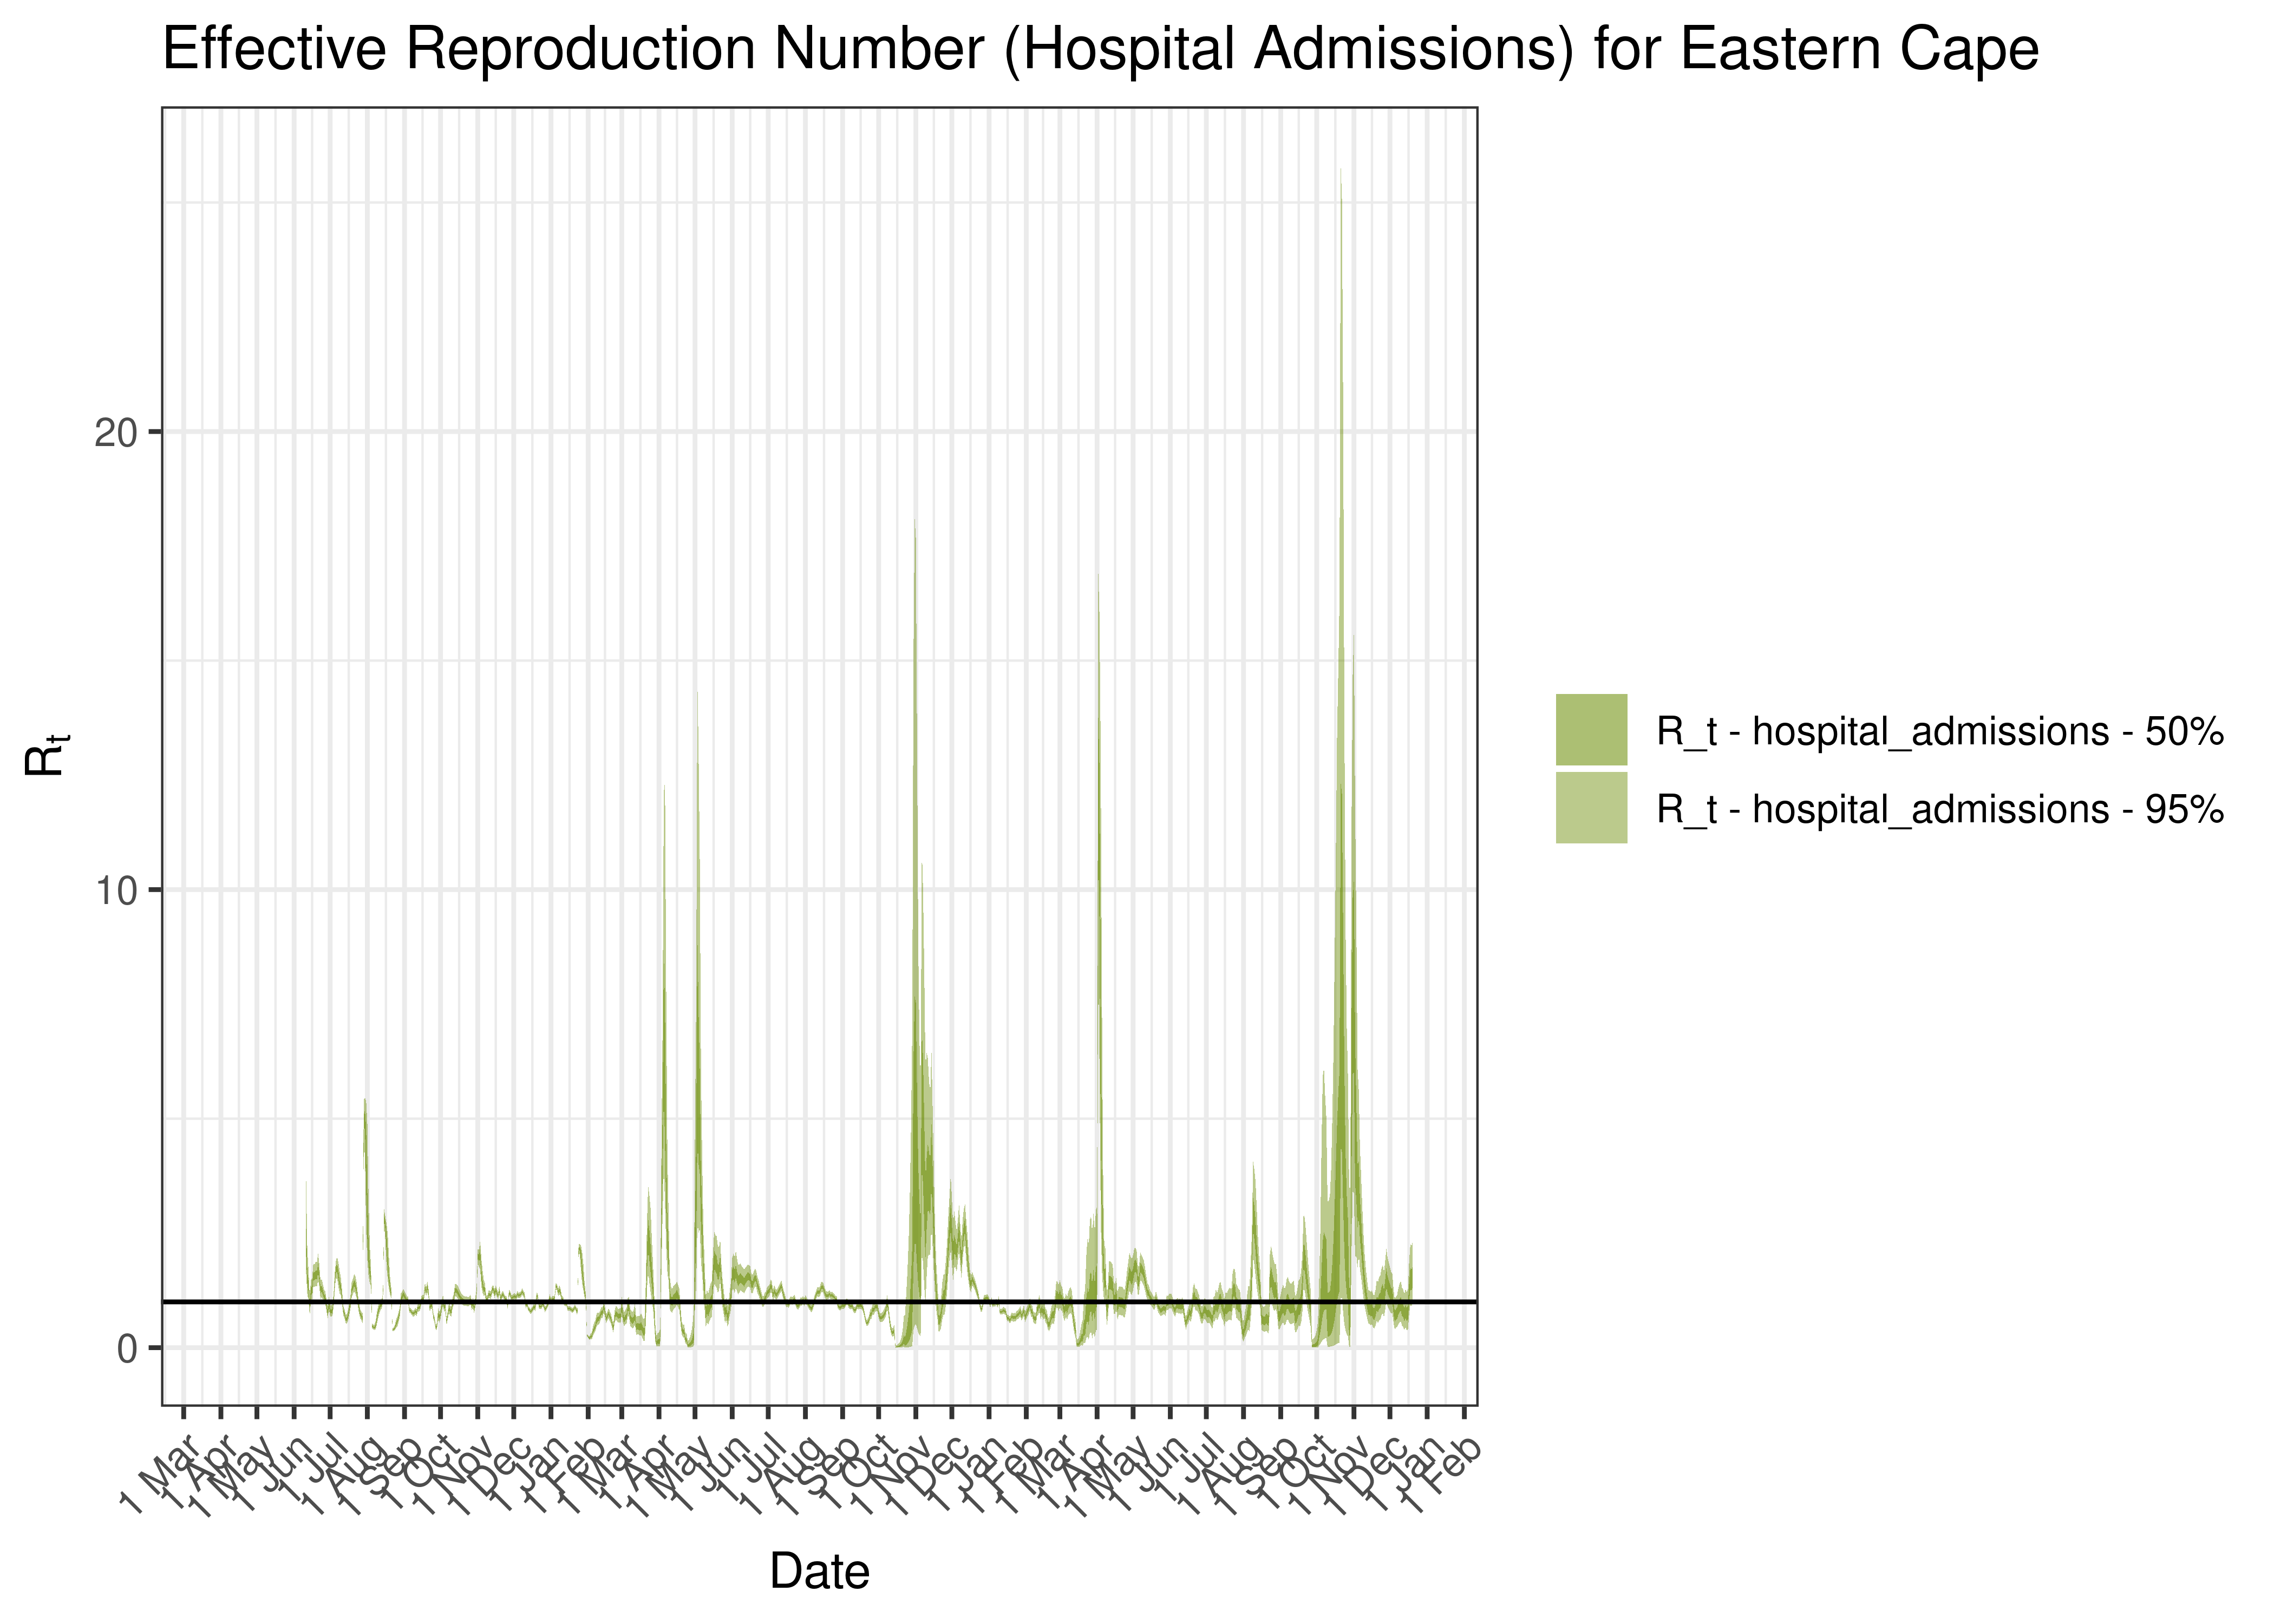 Estimated Effective Reproduction Number Based on Hospital Admissions for Eastern Cape since 1 April 2020